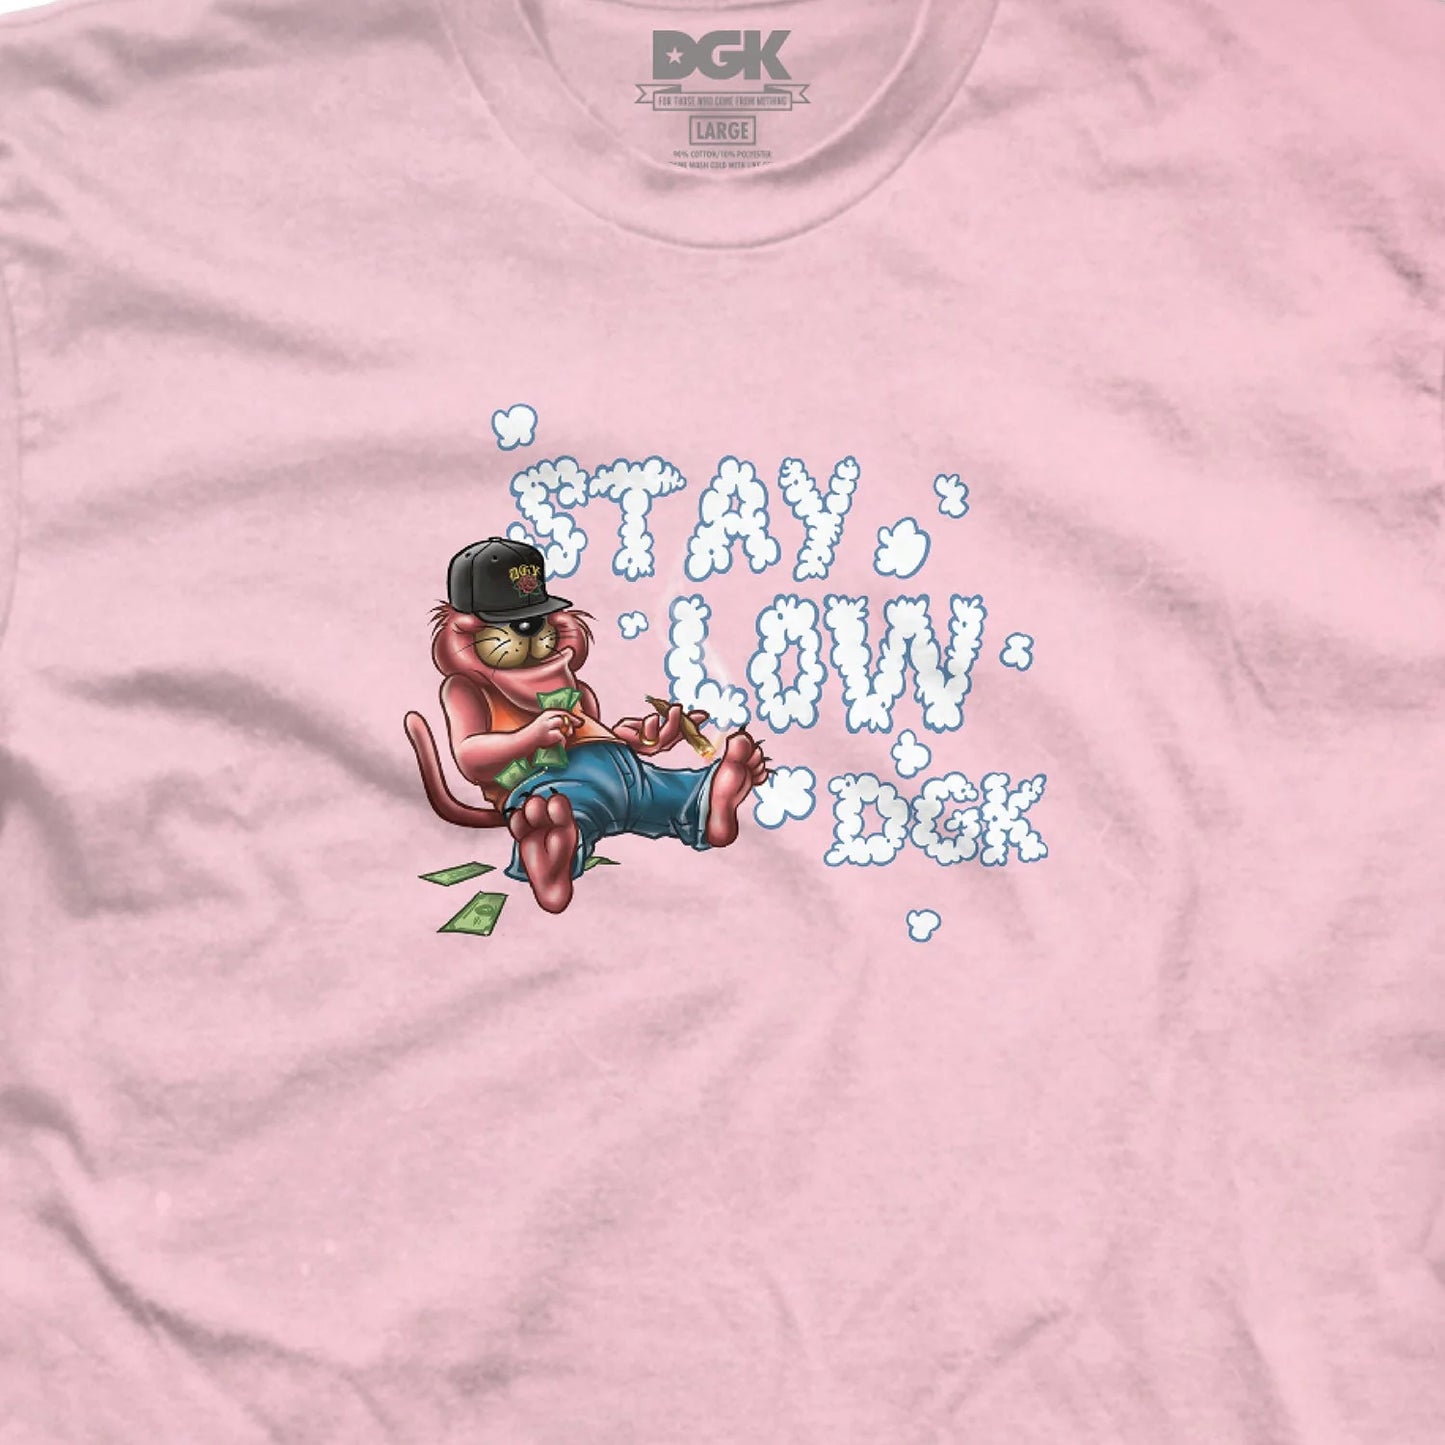 DGK Stay Low Graphic T-Shirt